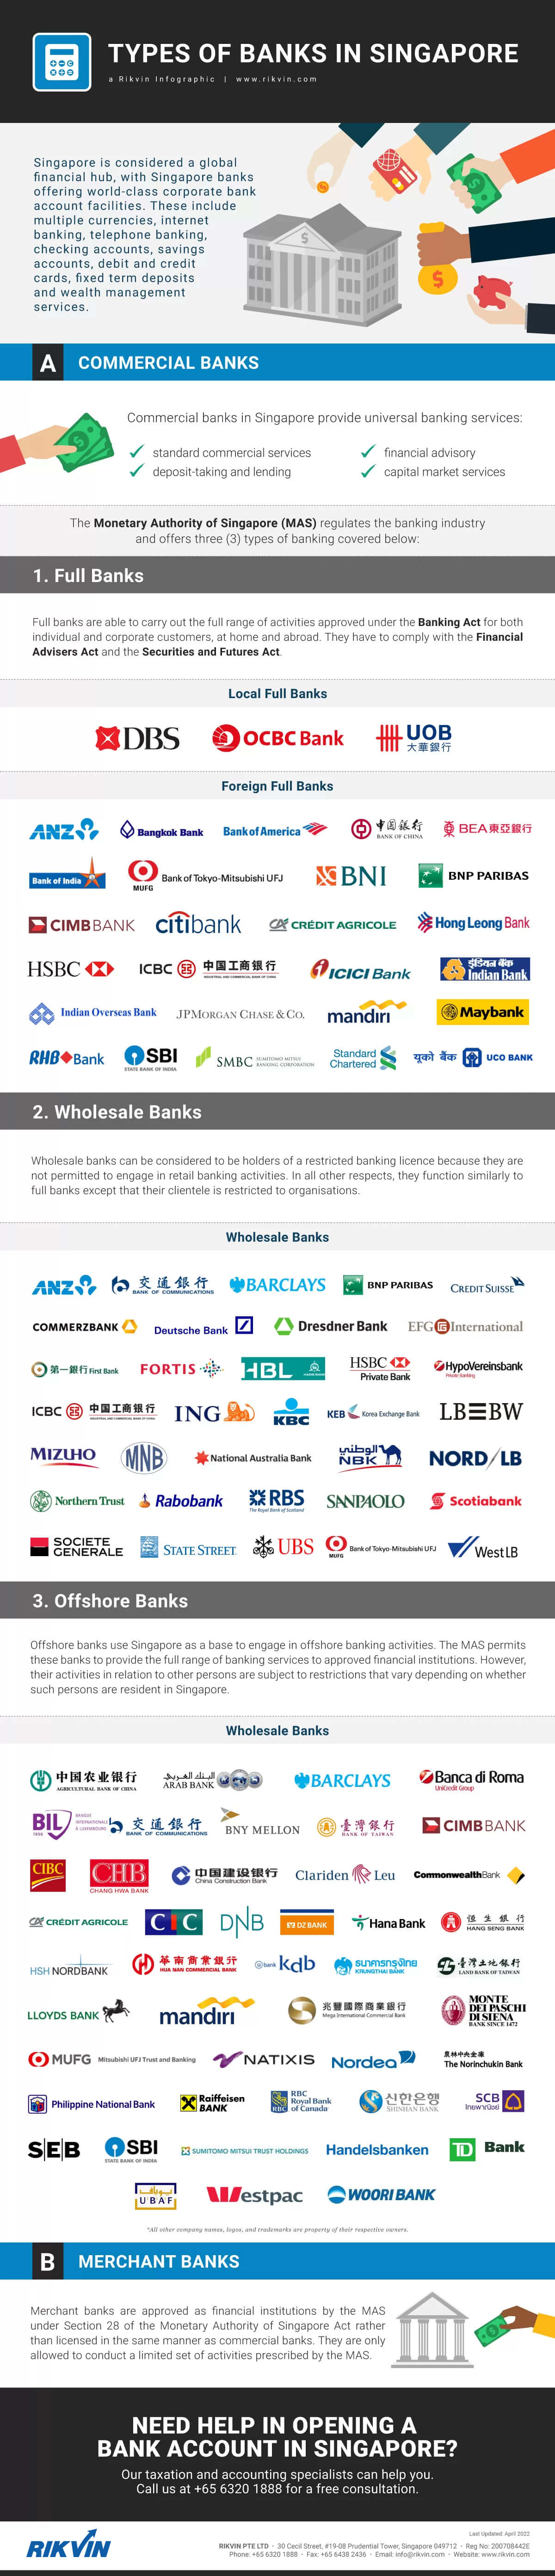 Types of Banks in Singapore - Rikvin Infographic